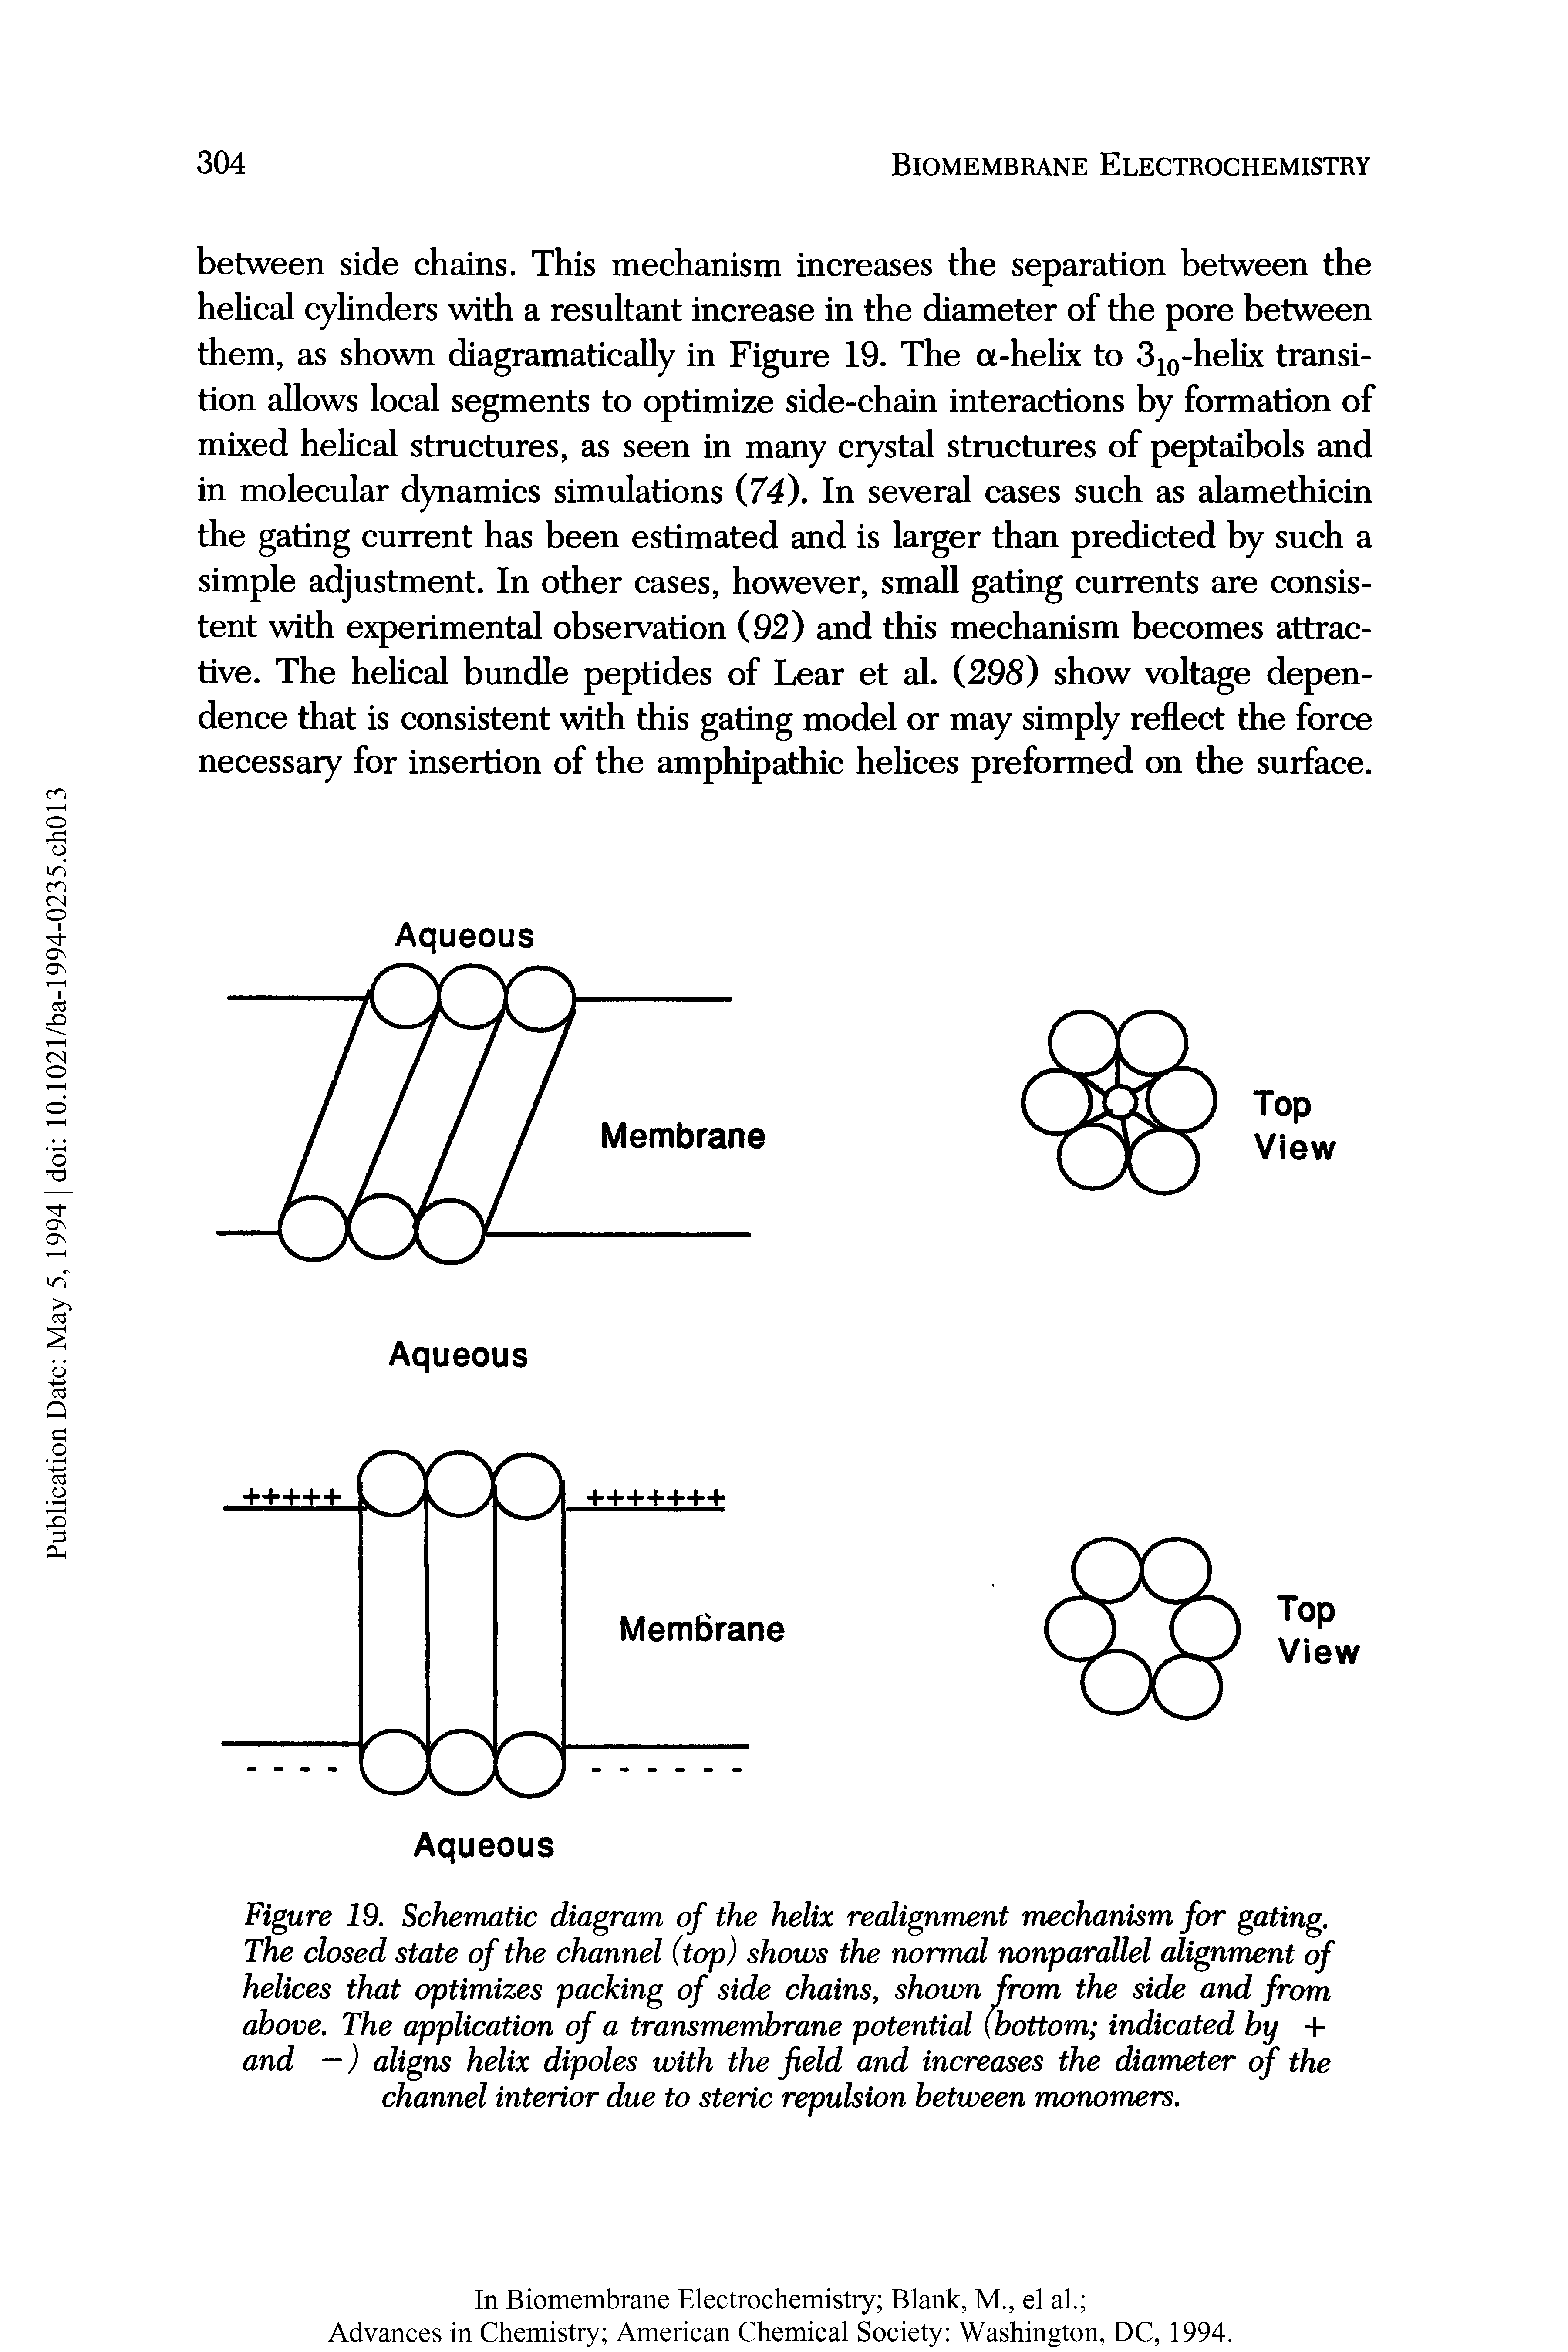 Figure 19. Schematic diagram of the helix realignment mechanism for gating. The closed state of the channel (top) shows the normal nonparallel alignment of helices that optimizes packing of side chains, shown from the side and from above. The application of a transmembrane potential (bottom indicated by + and —) aligns helix dipoles with the field and increases the diameter of the channel interior due to steric repulsion between monomers.